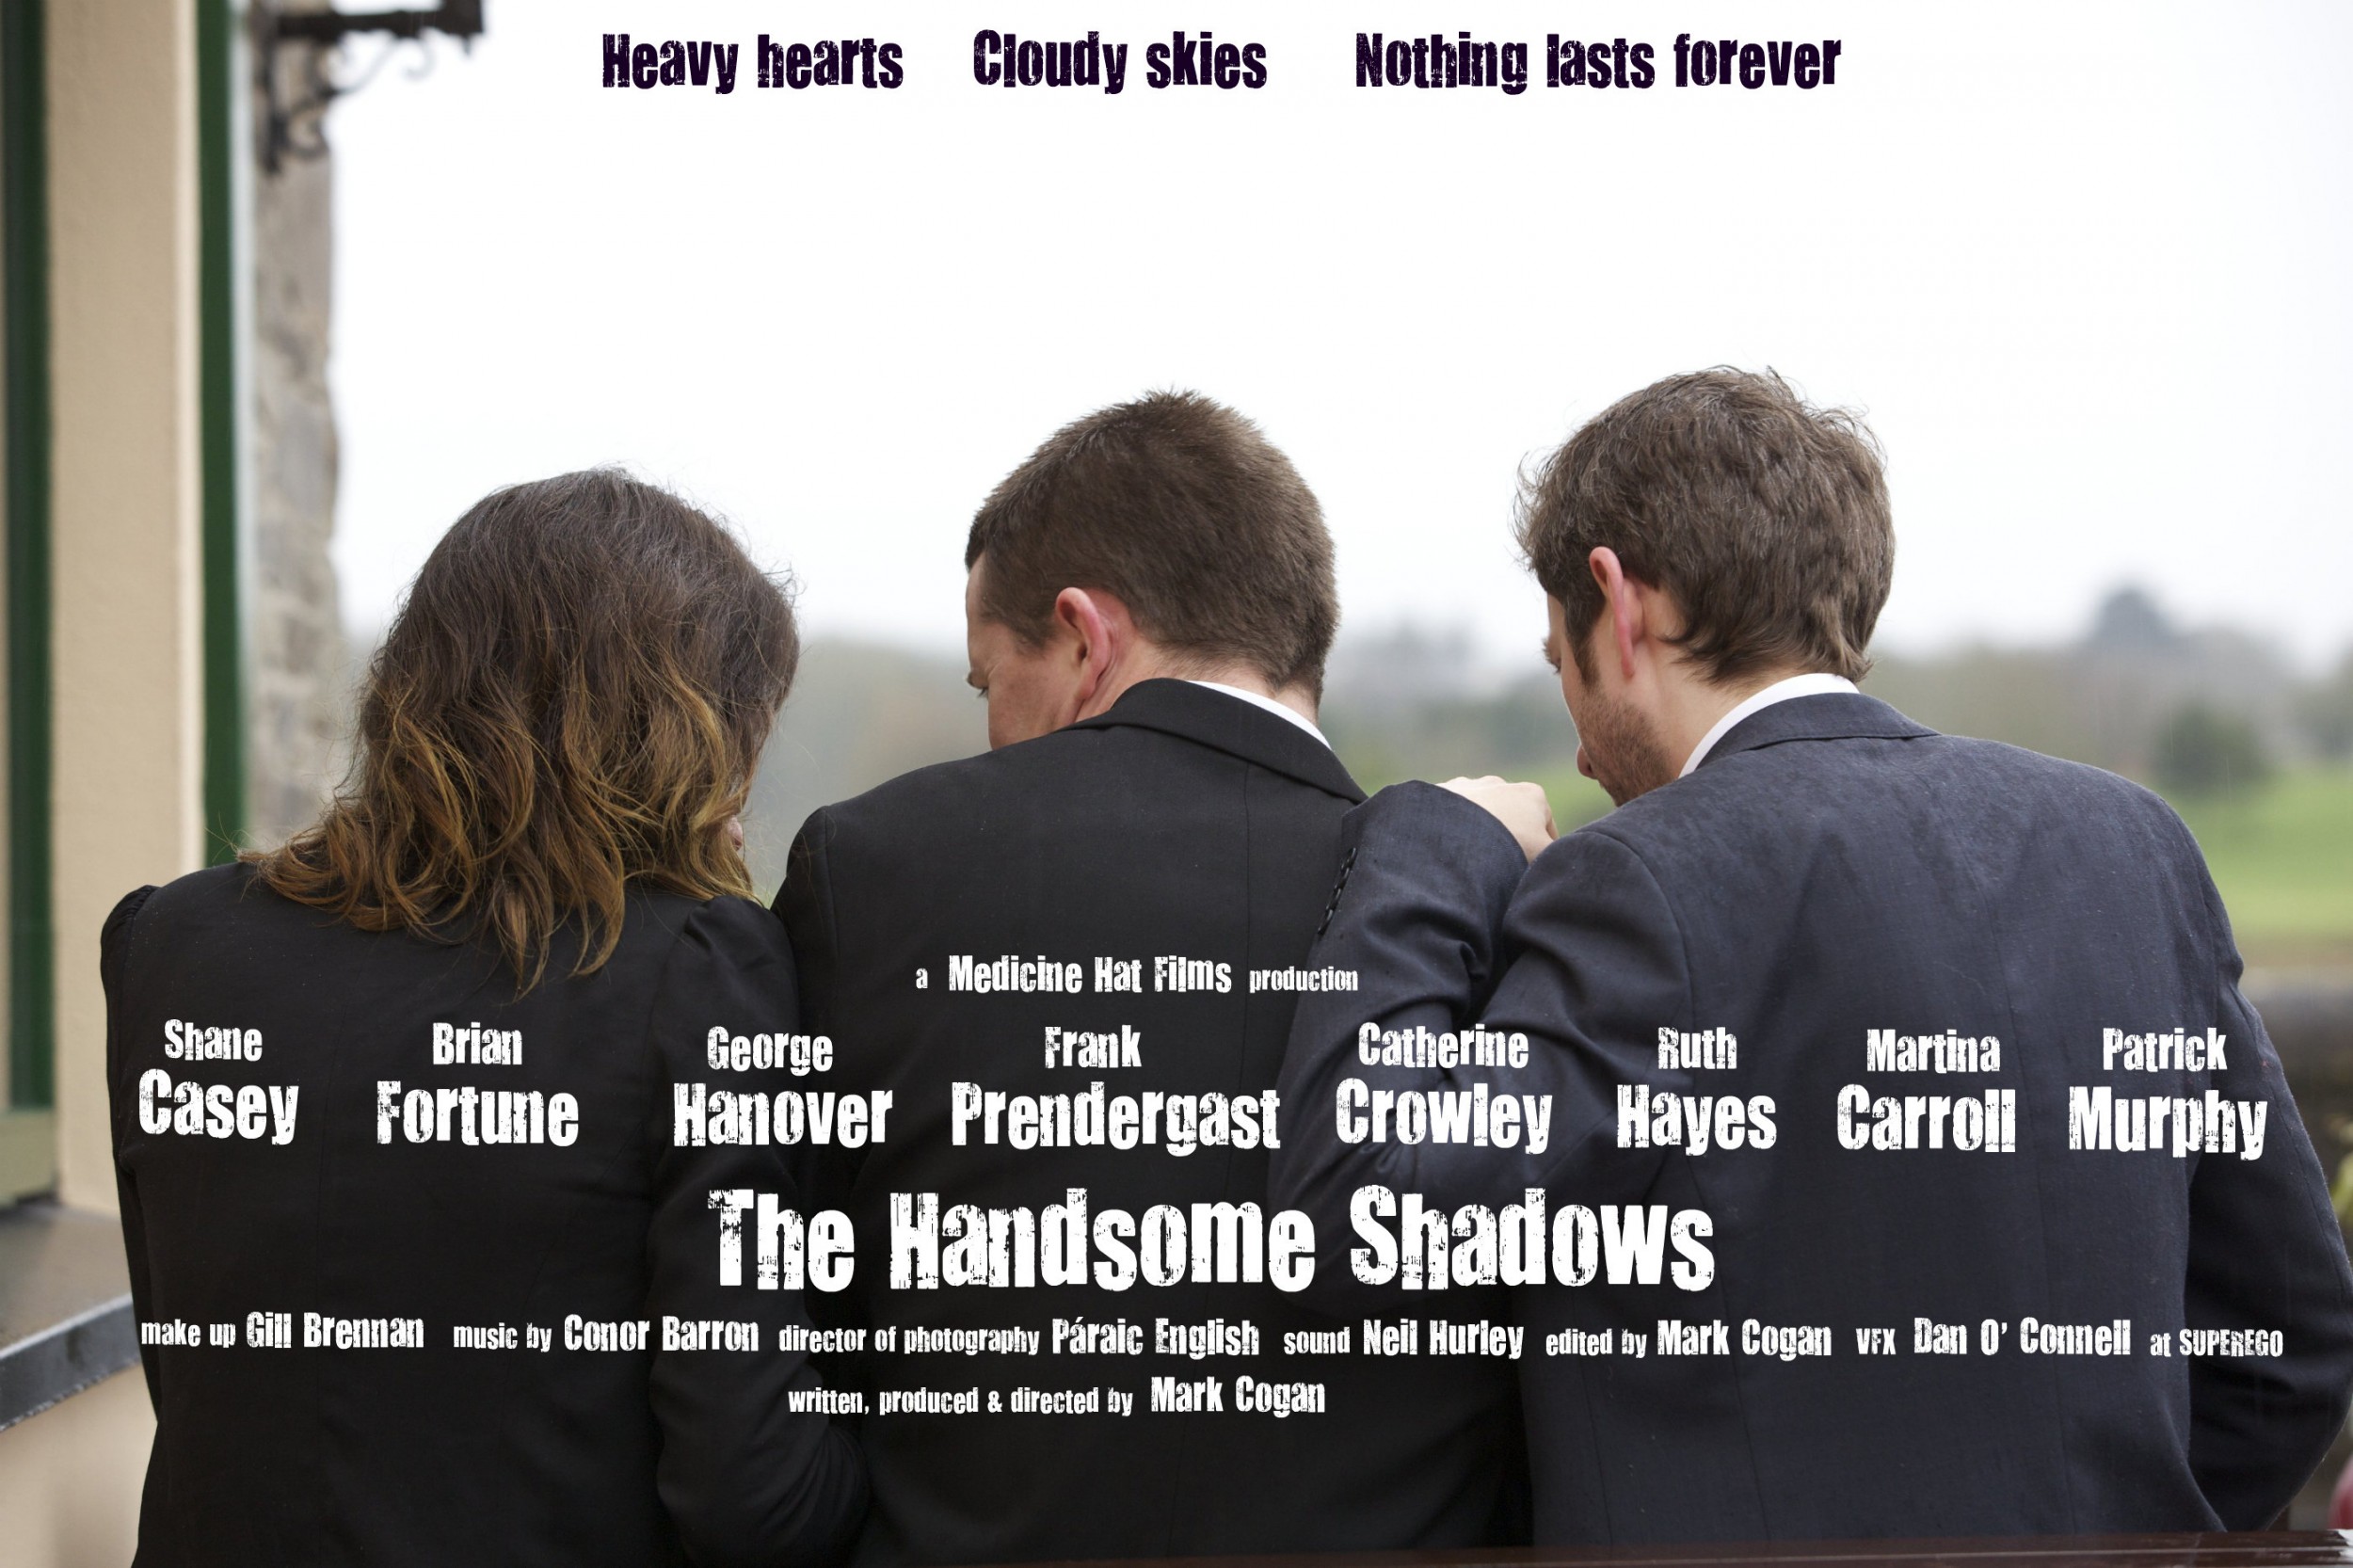 Mega Sized Movie Poster Image for The Handsome Shadows